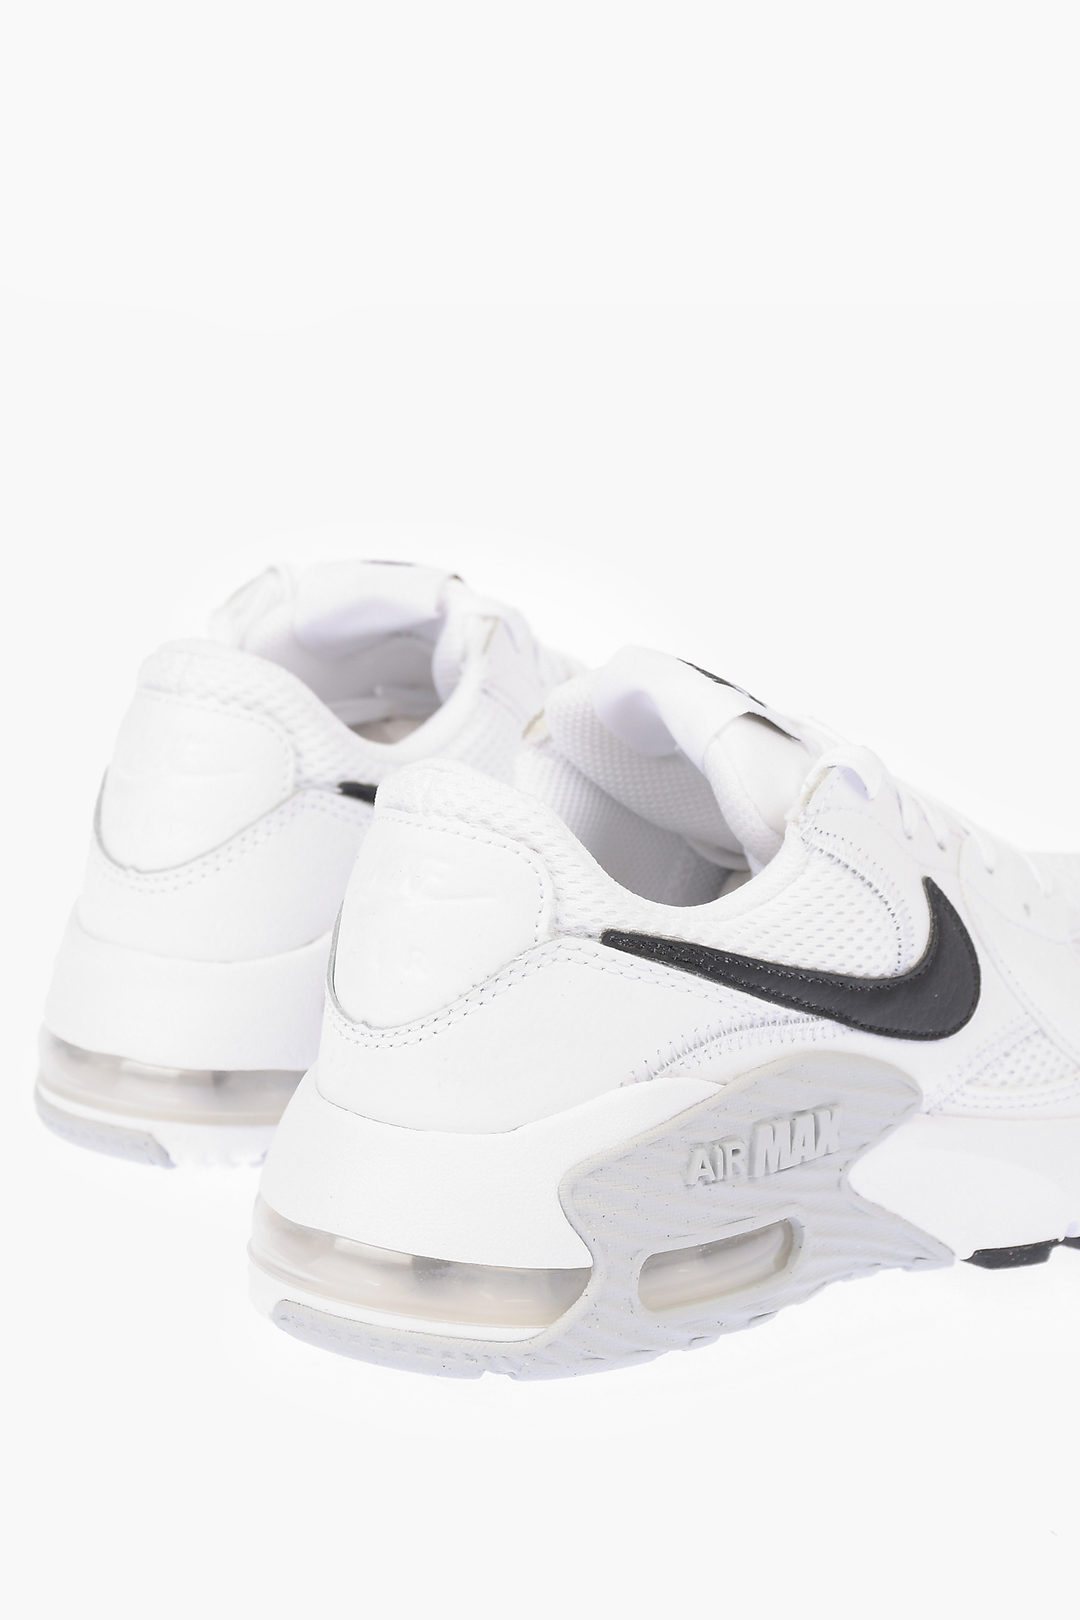 in de rij gaan staan Voorzitter mechanisch Nike Fabric and Leather AIR MAX EXCEE Sneakers women - Glamood Outlet